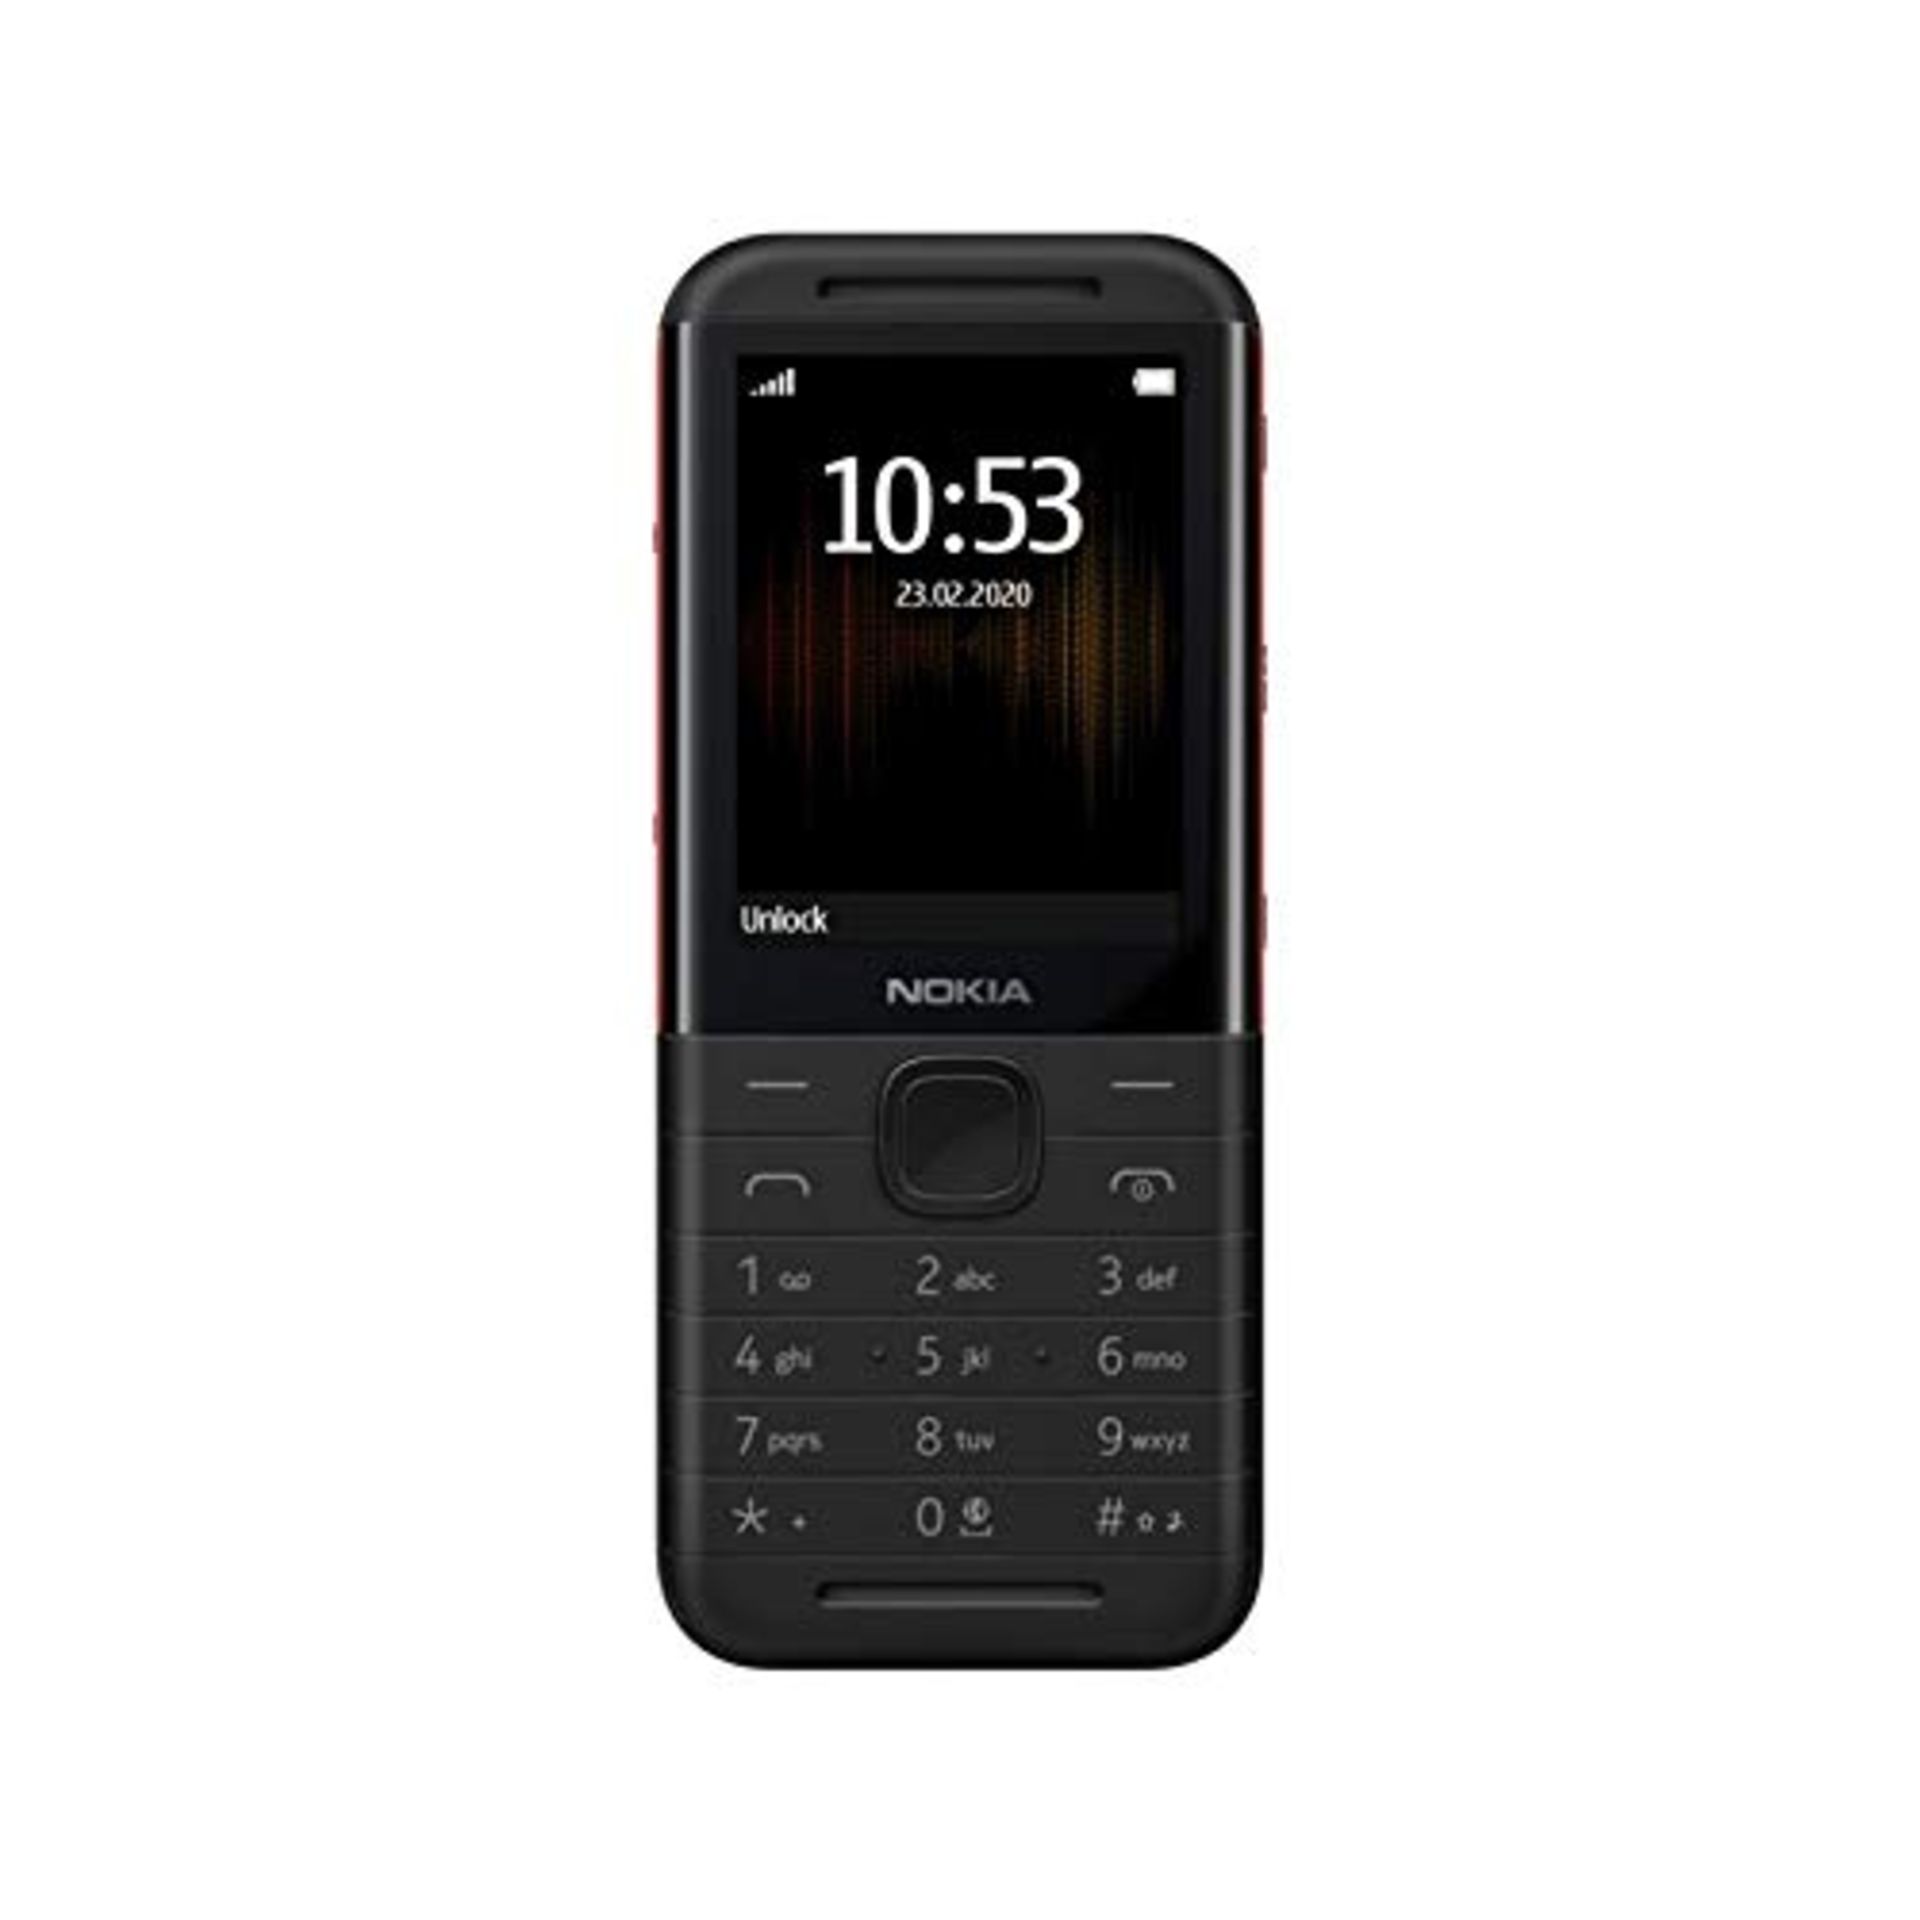 Nokia 5310 Dual Sim Mobile Phone, suitable for all phone operators, 0.02 GB, 2.4" Colo